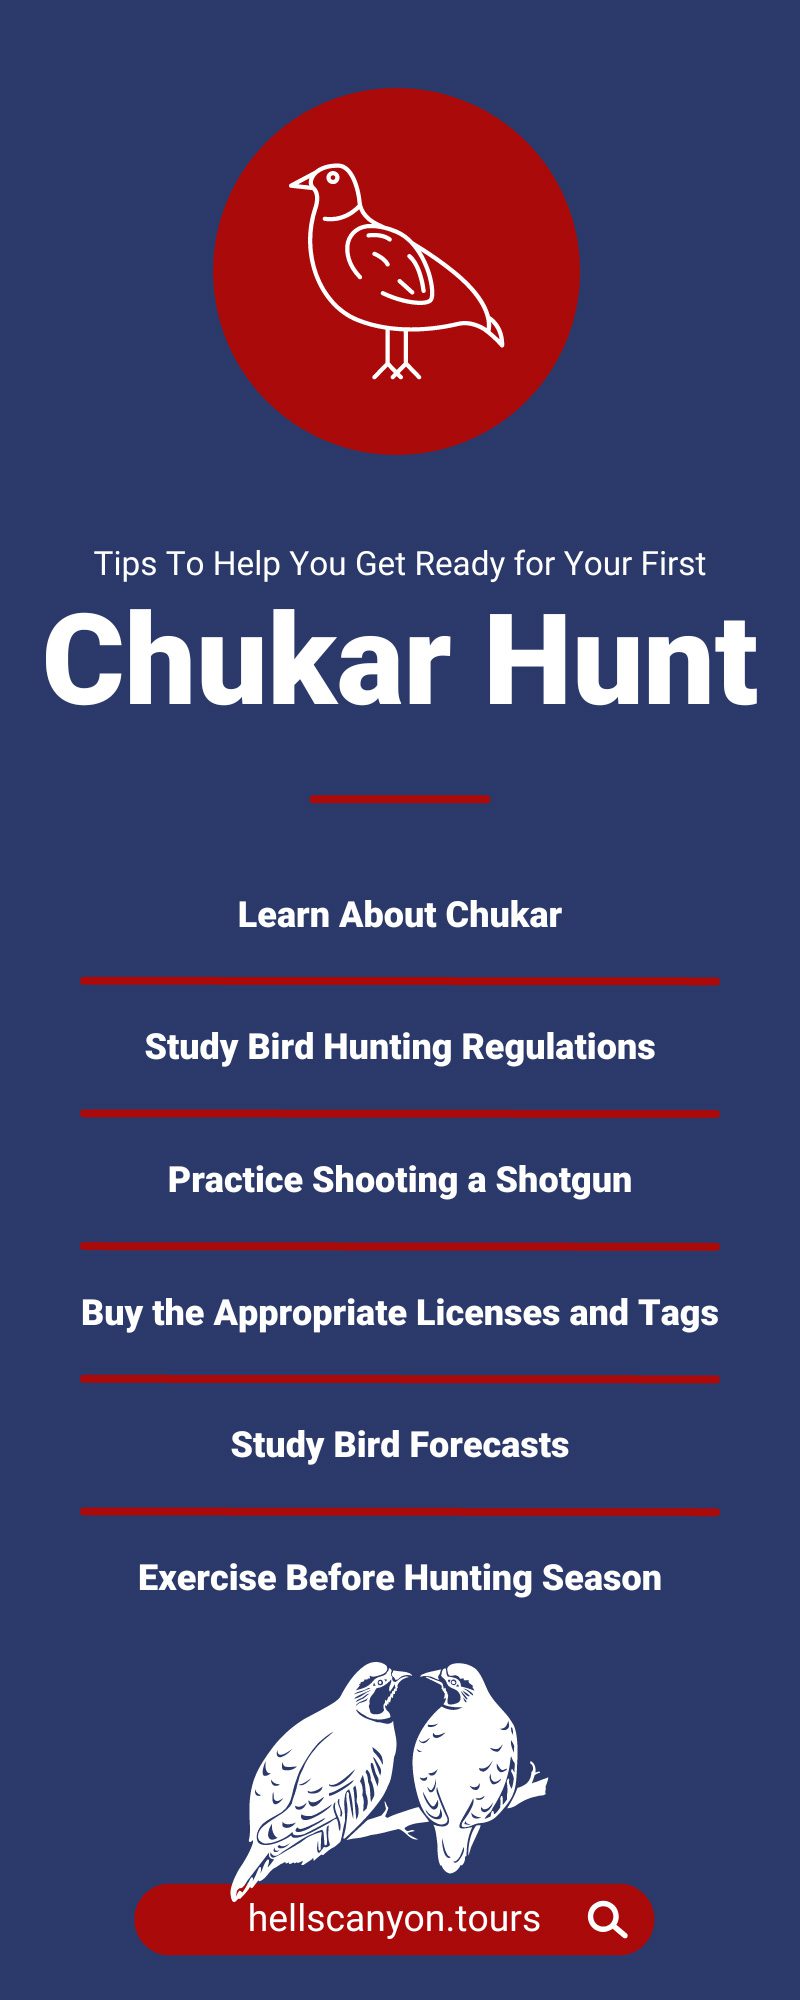 10 Tips To Help You Get Ready for Your First Chukar Hunt